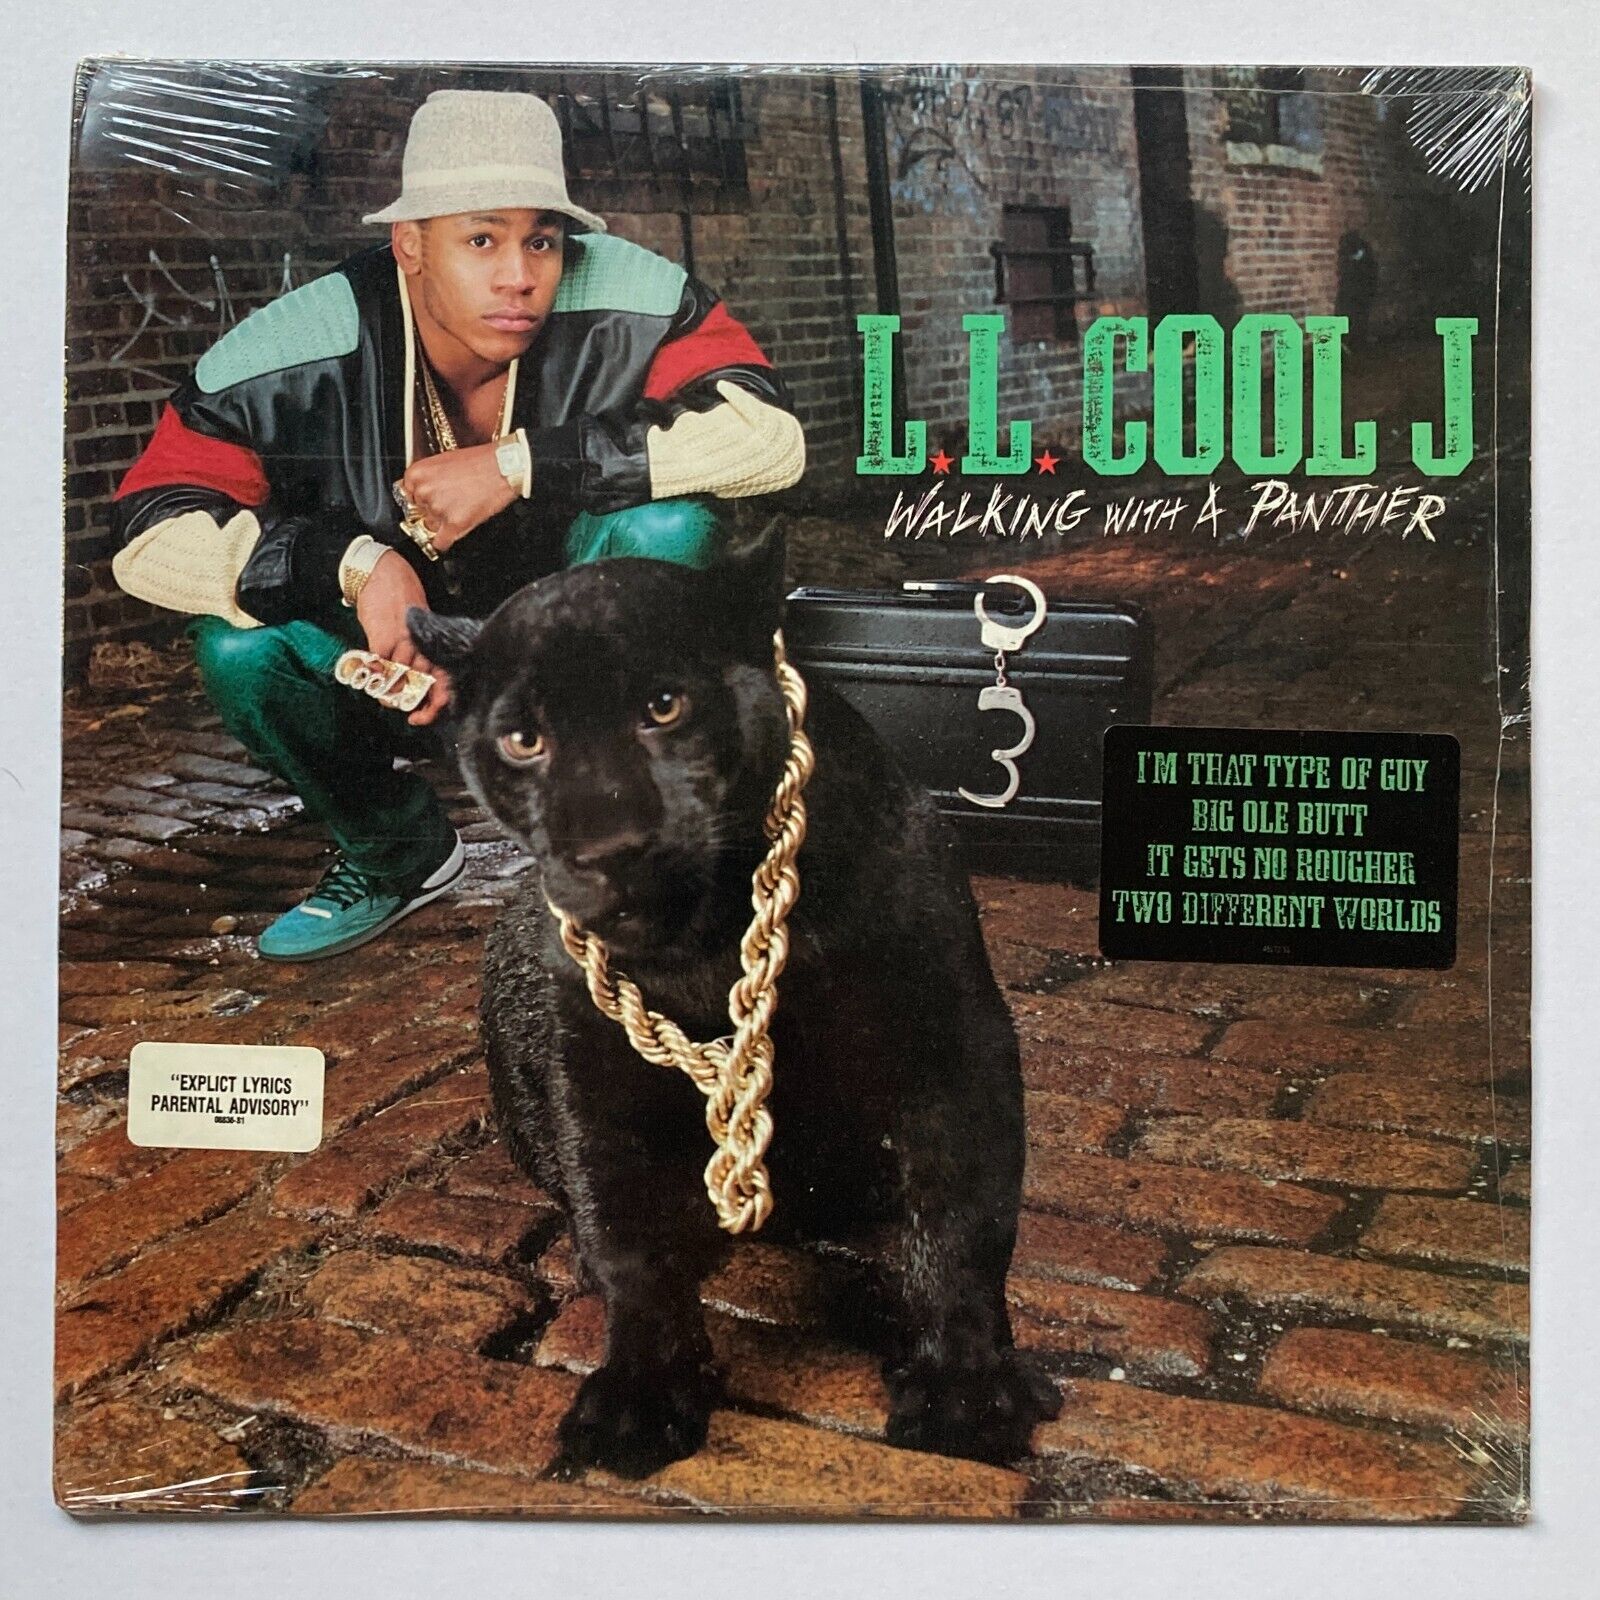 LL COOL J - WALKING WITH A PANTHER LP - ORIGINAL DEF JAM 1989 - FACTORY SEALED